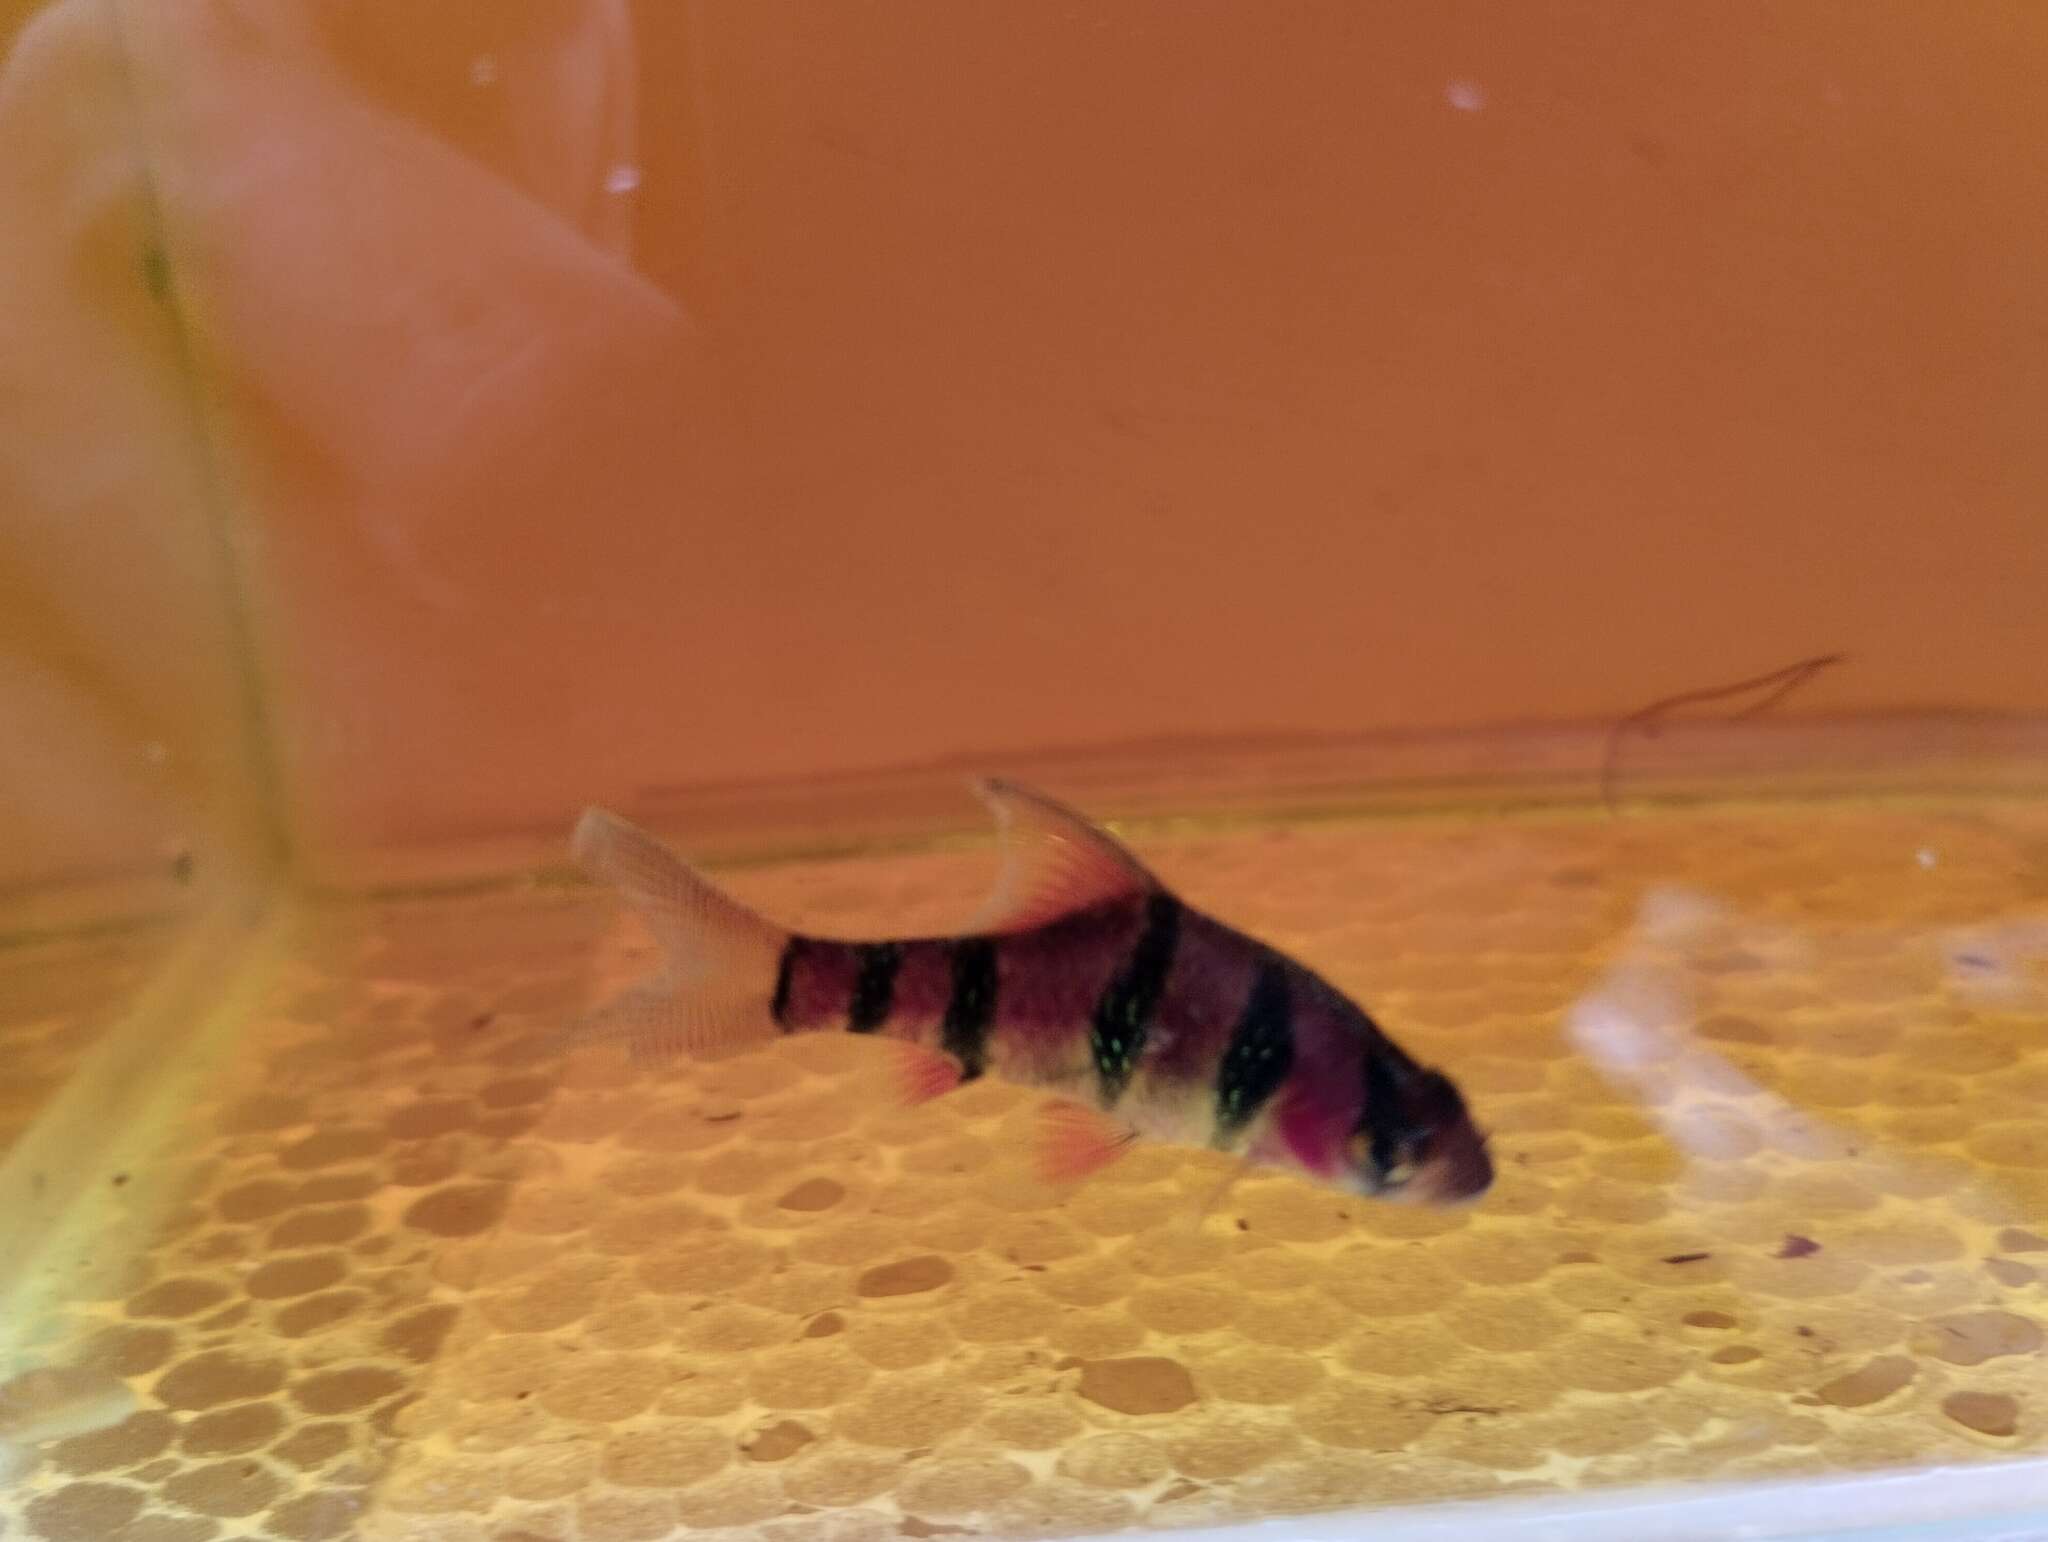 Image of Six-banded tiger barb